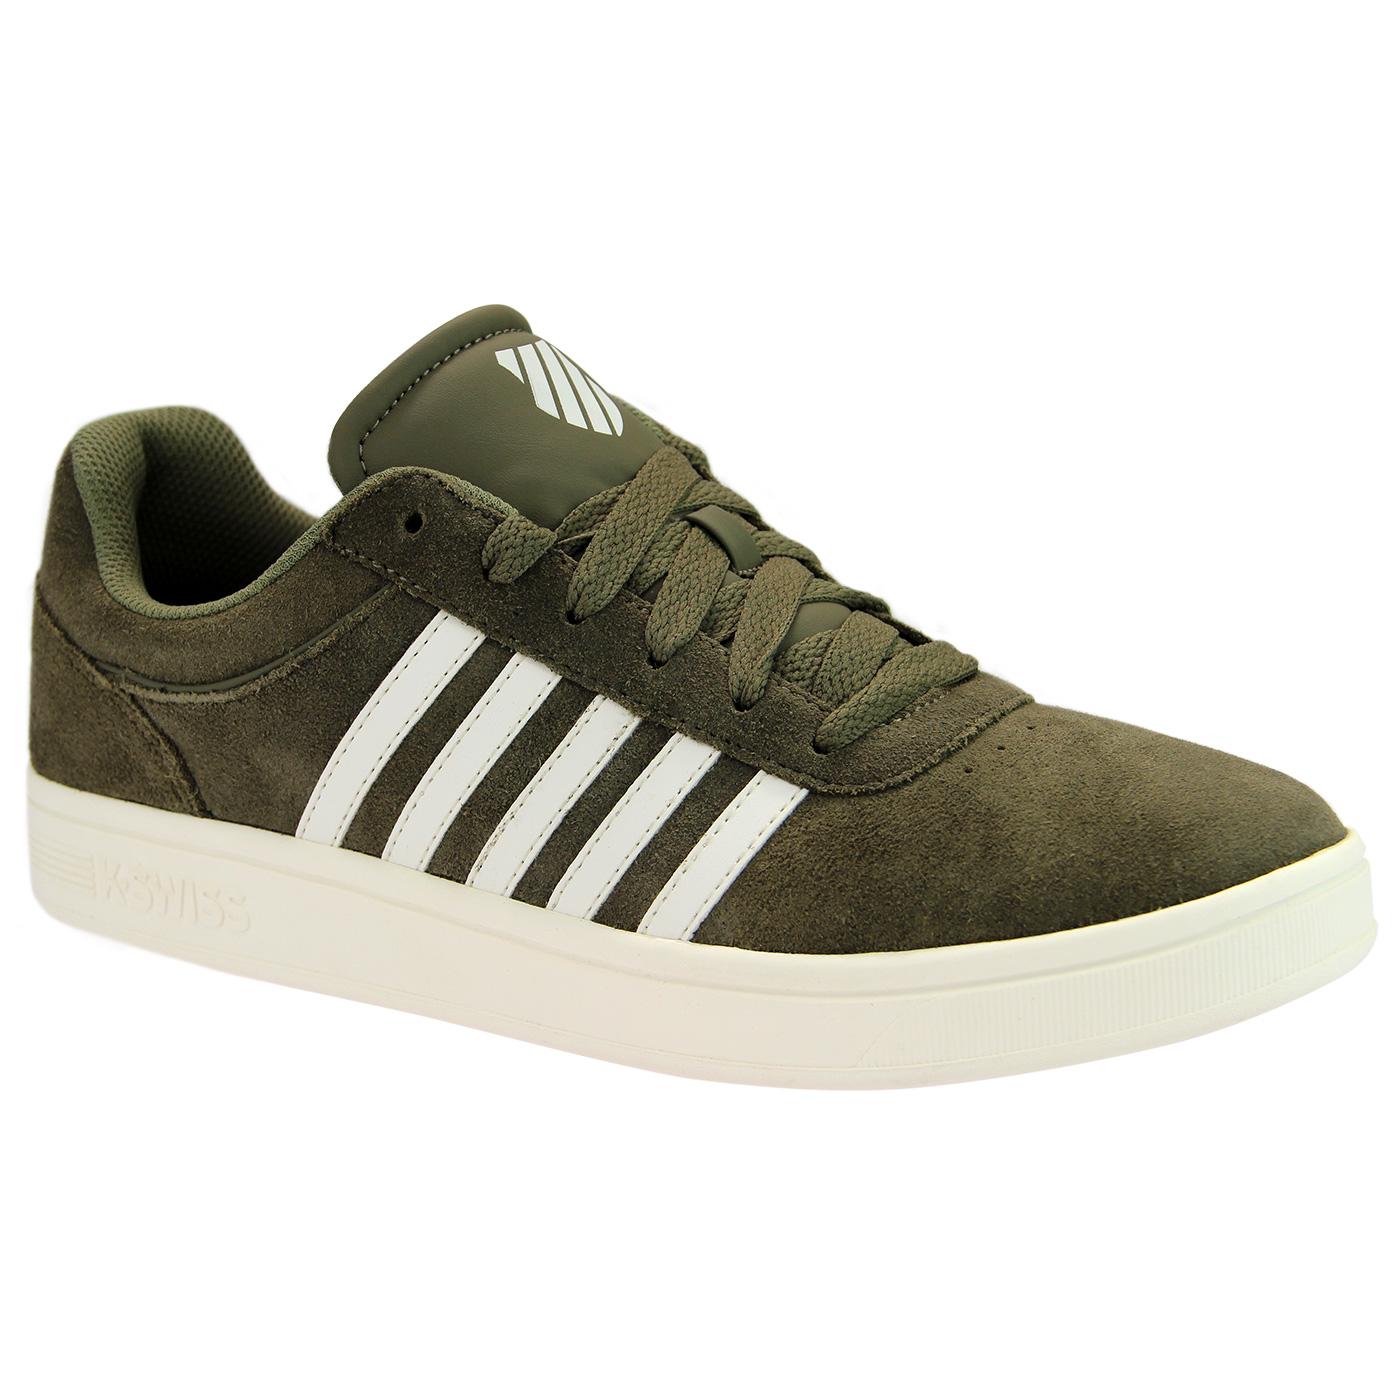 K-SWISS 'Court Cheswick' Suede 70s Tennis Trainers in Olive